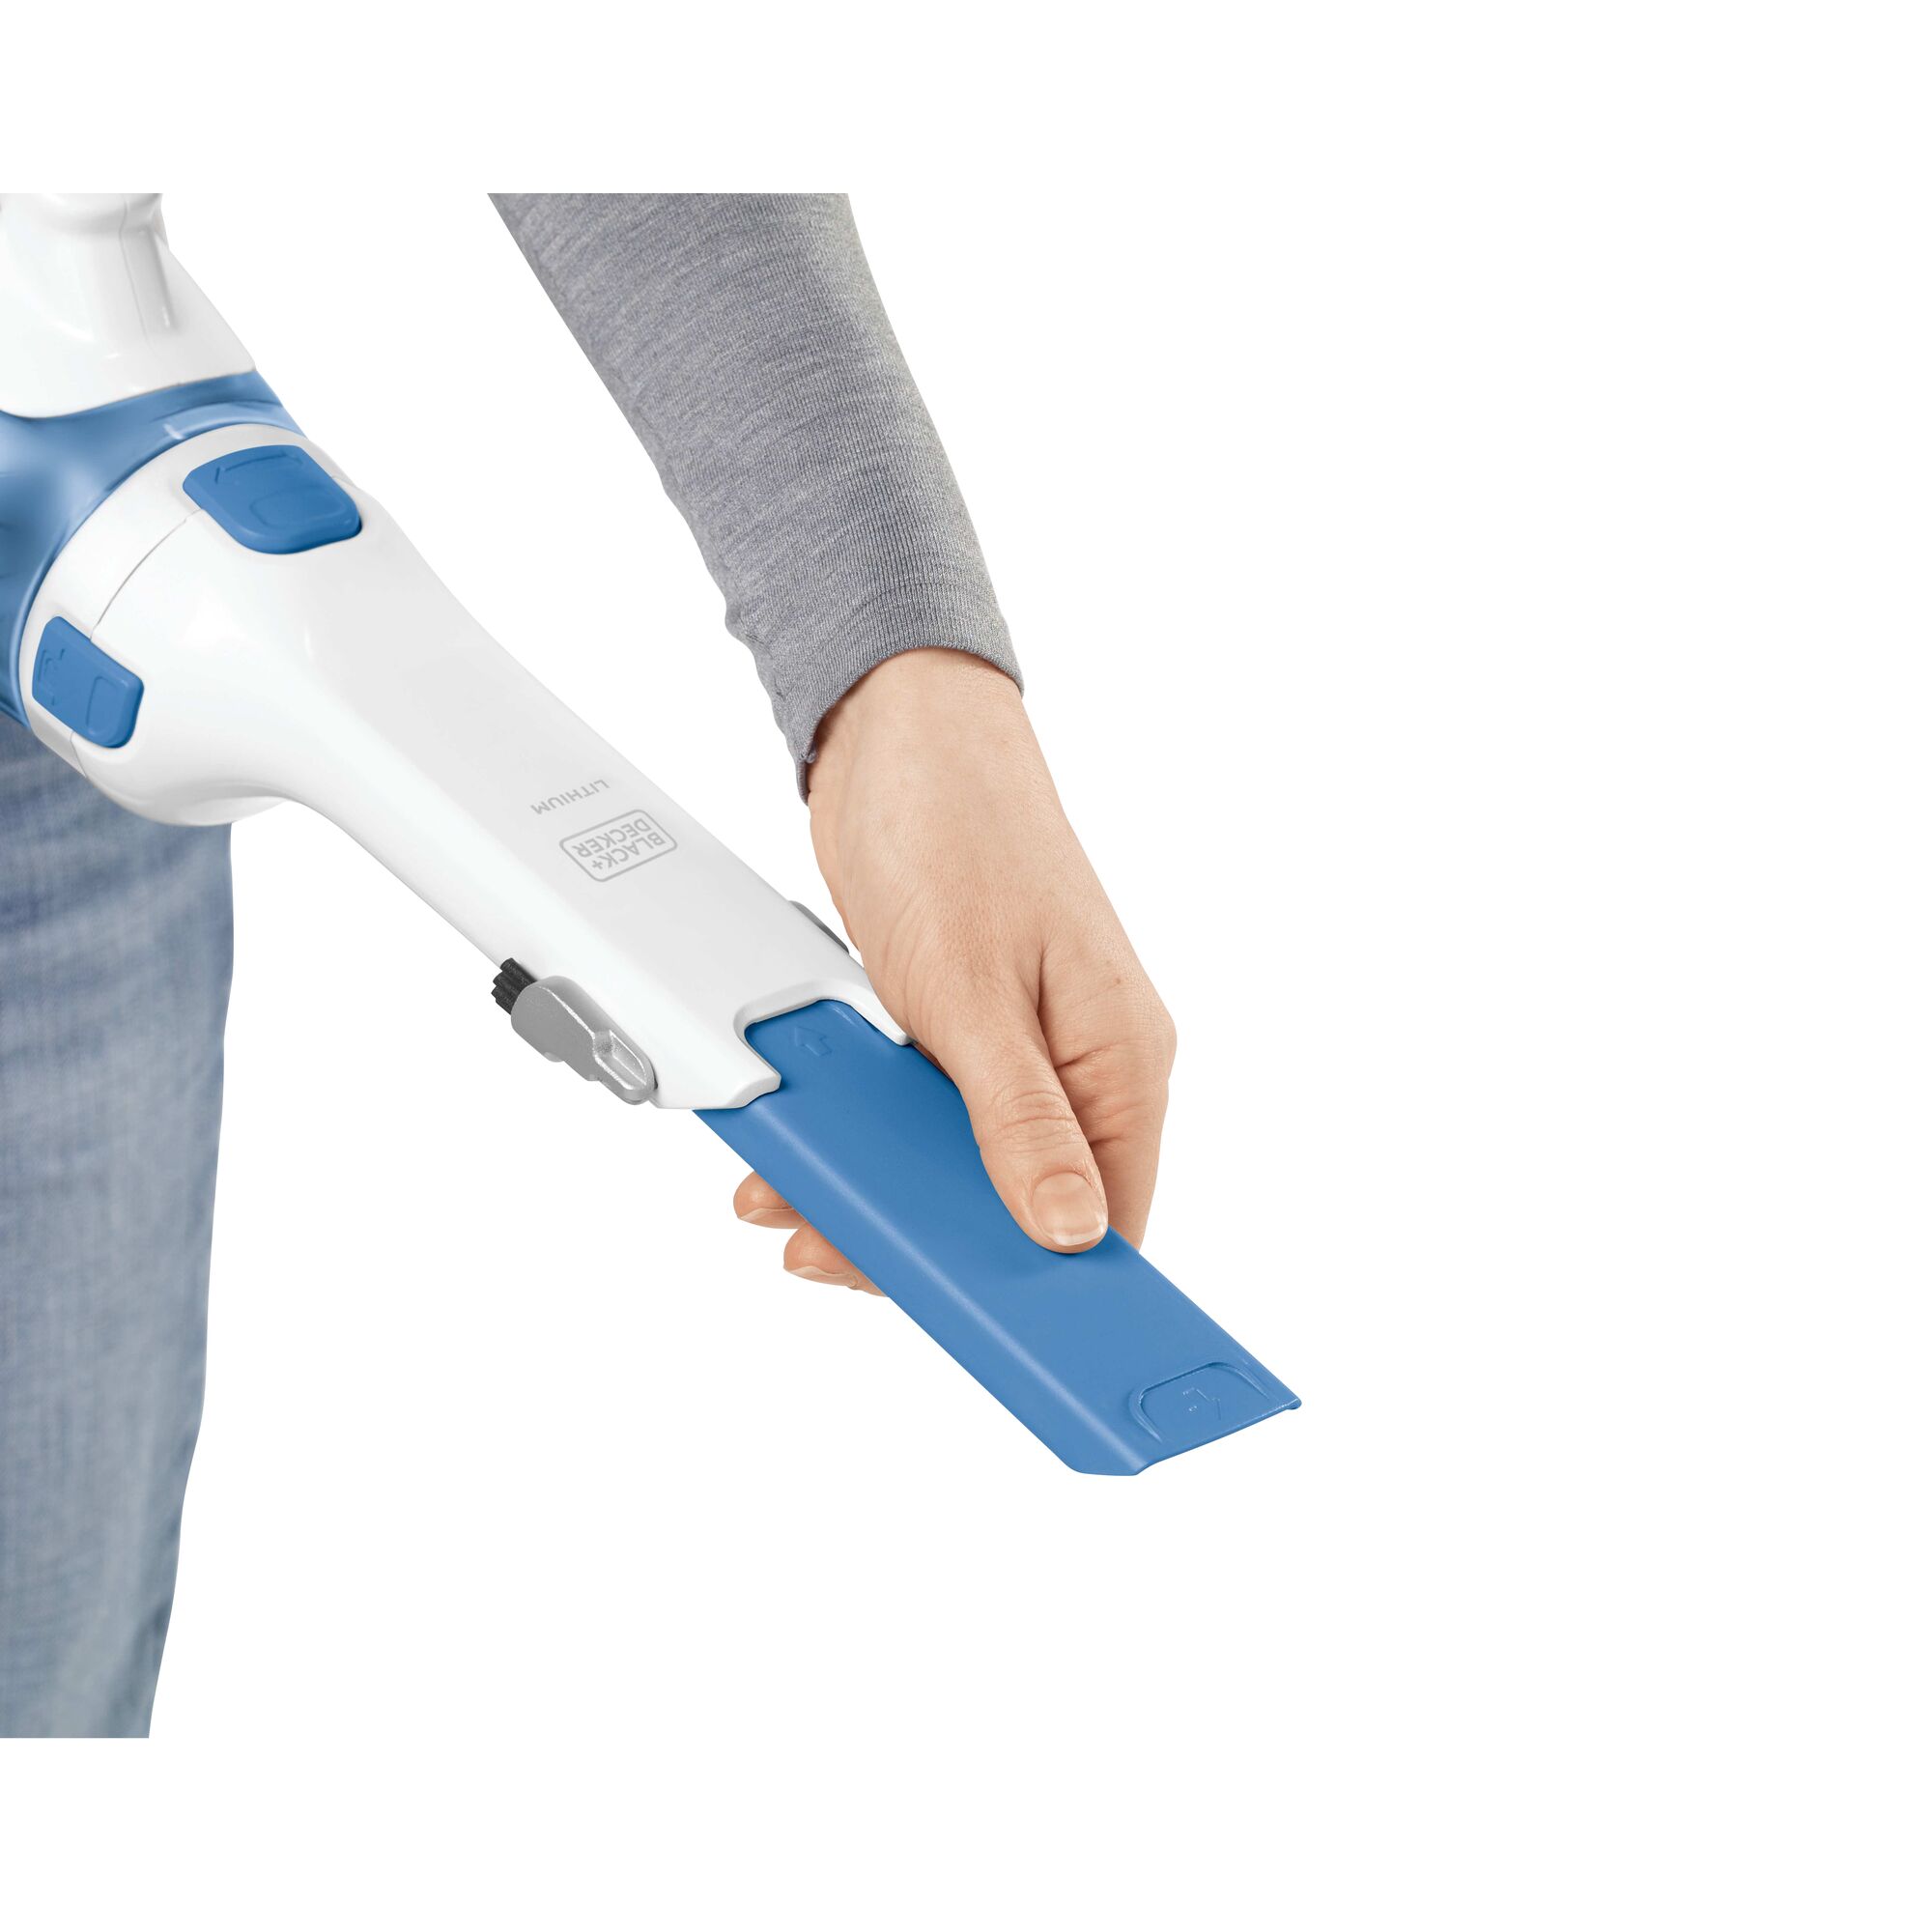 Pull out crevice tool feature of dustbuster Cordless Hand Vacuum.